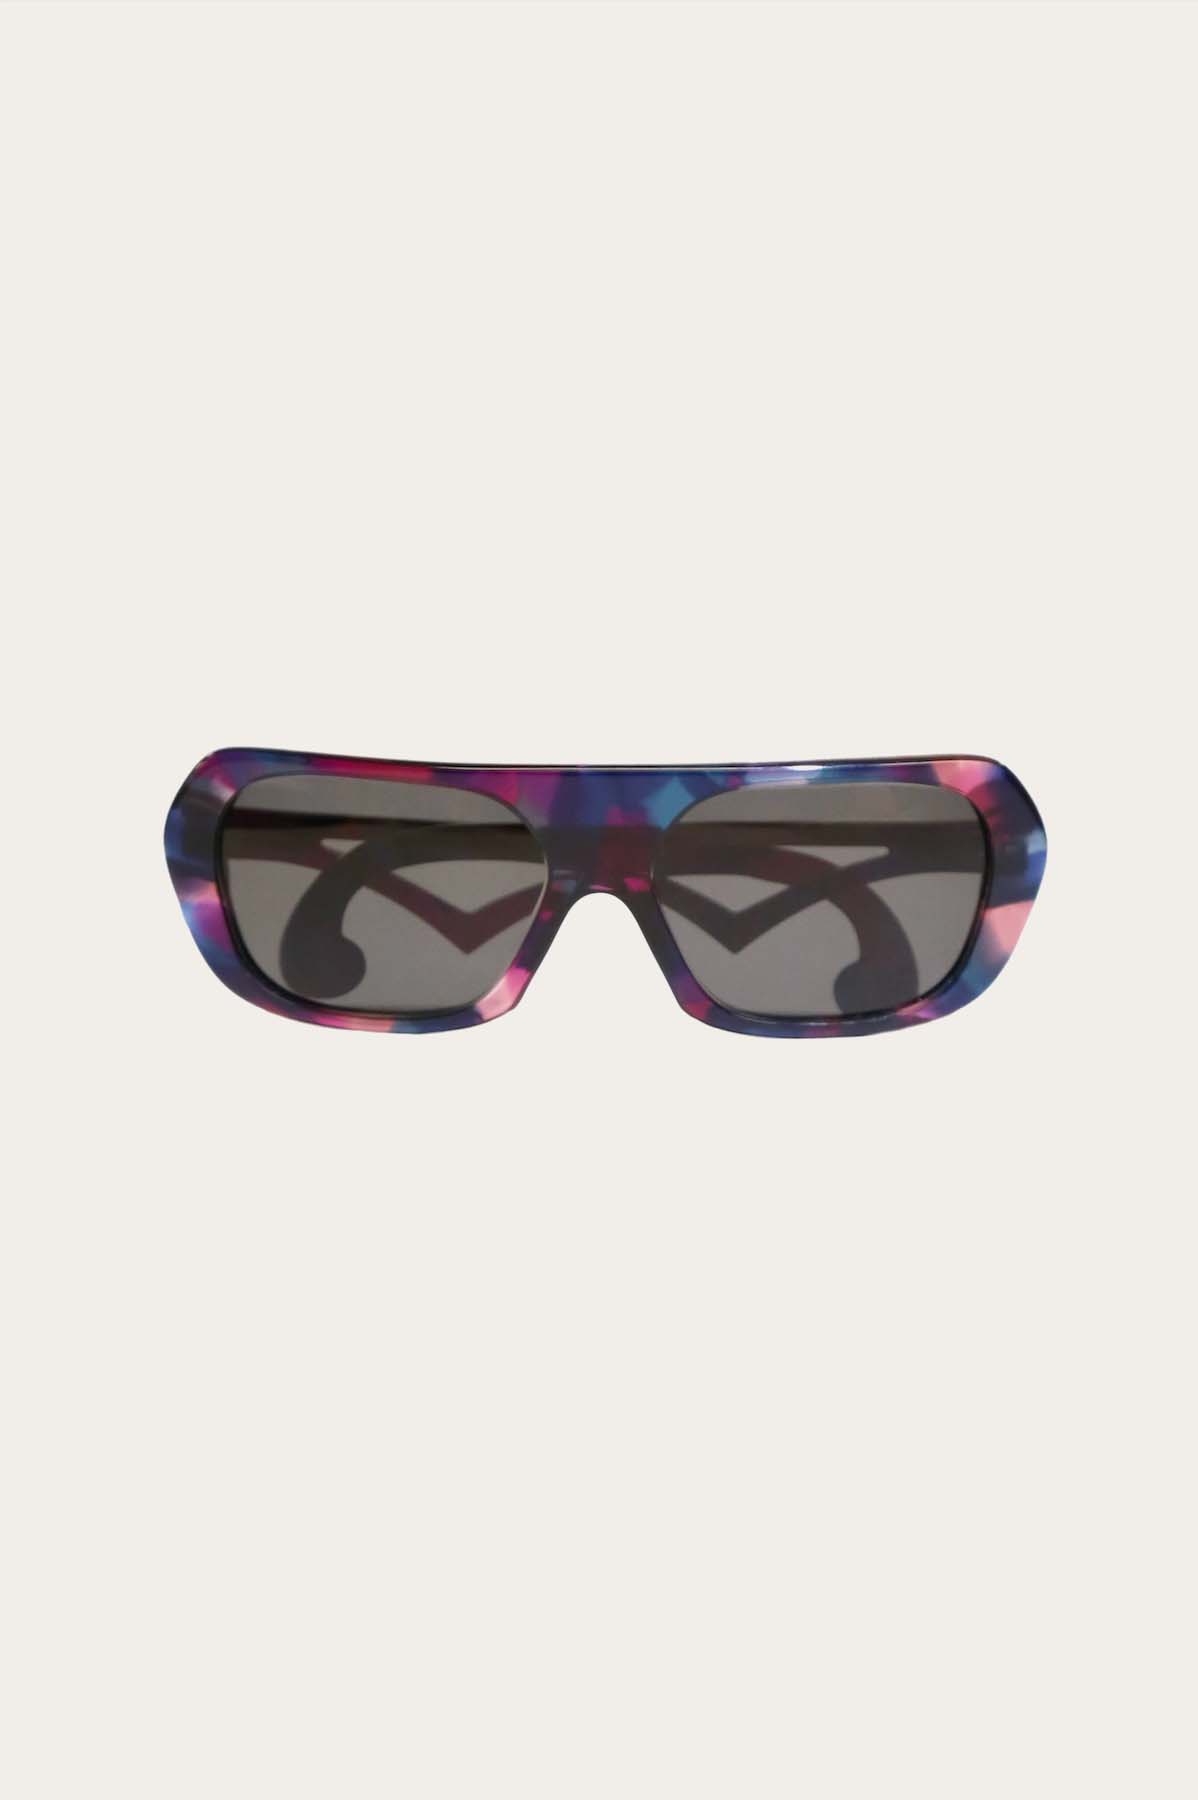 Front of  Pink Blue Camo, large eyeglass frame with tinted lenses, branch with a V-Shaped design